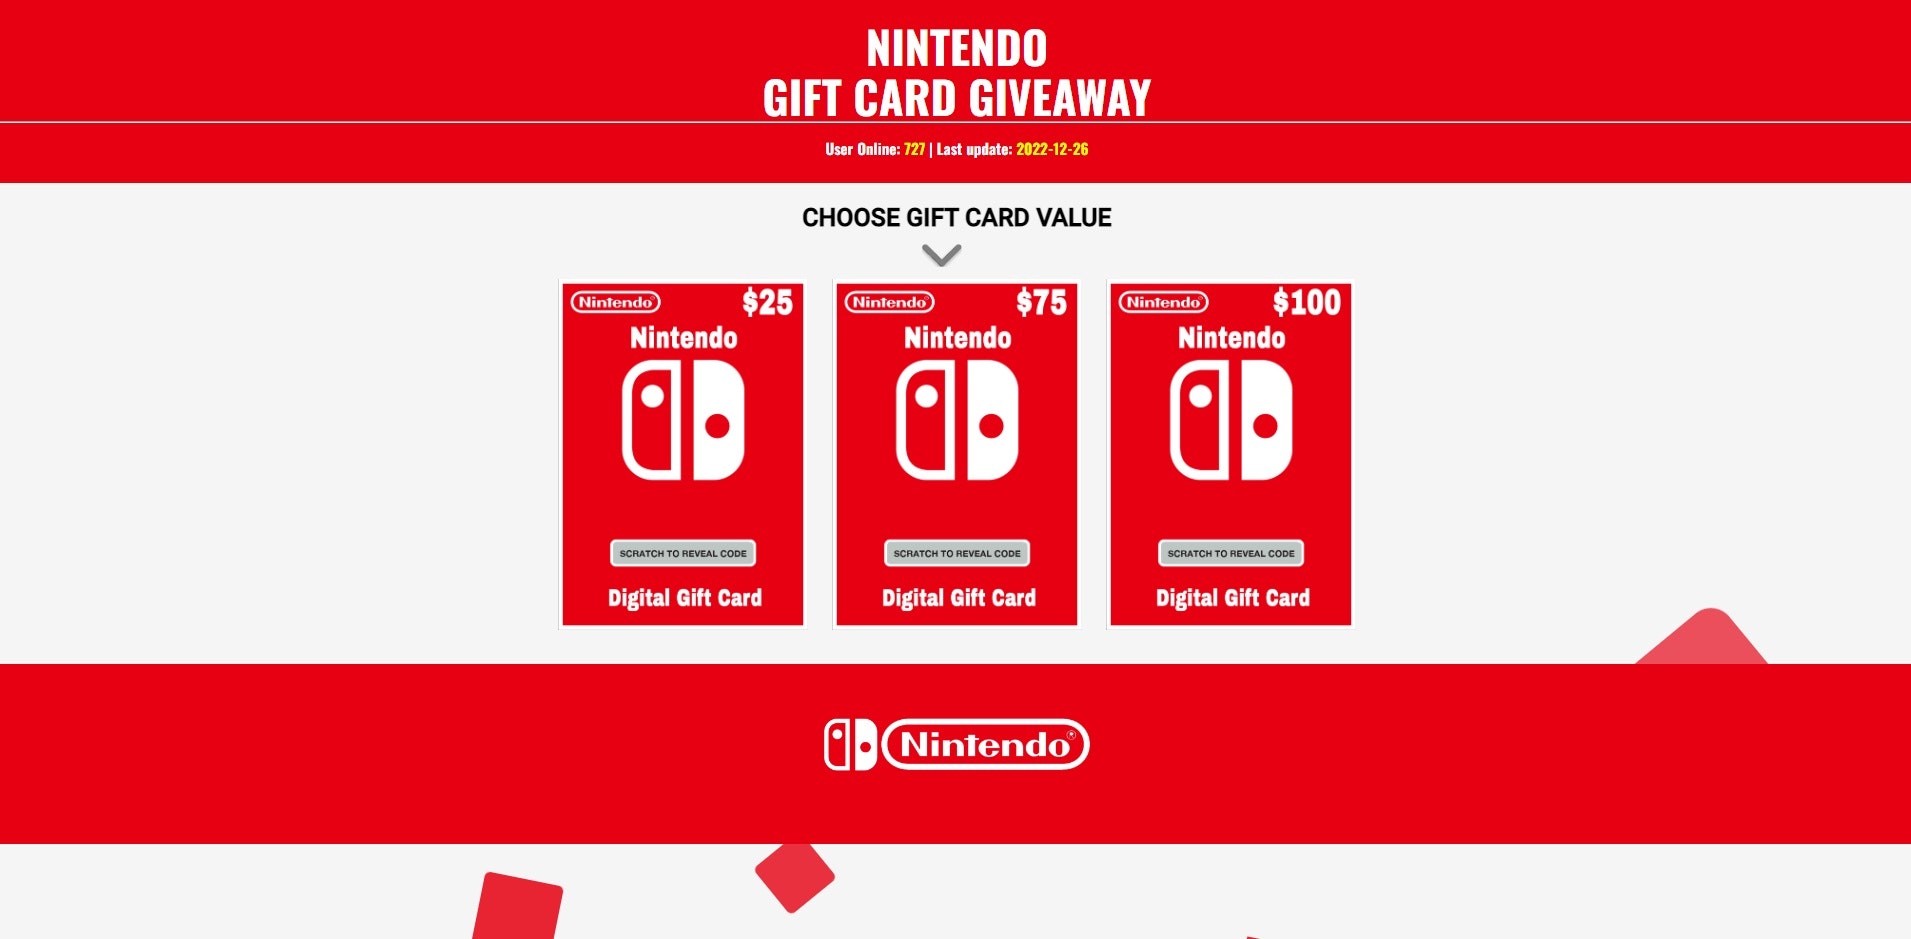 2024 Card Hunt Product Product Nintendo 2023 Reviews Information, | eShop Codes Gift FREE Latest Updates, - and